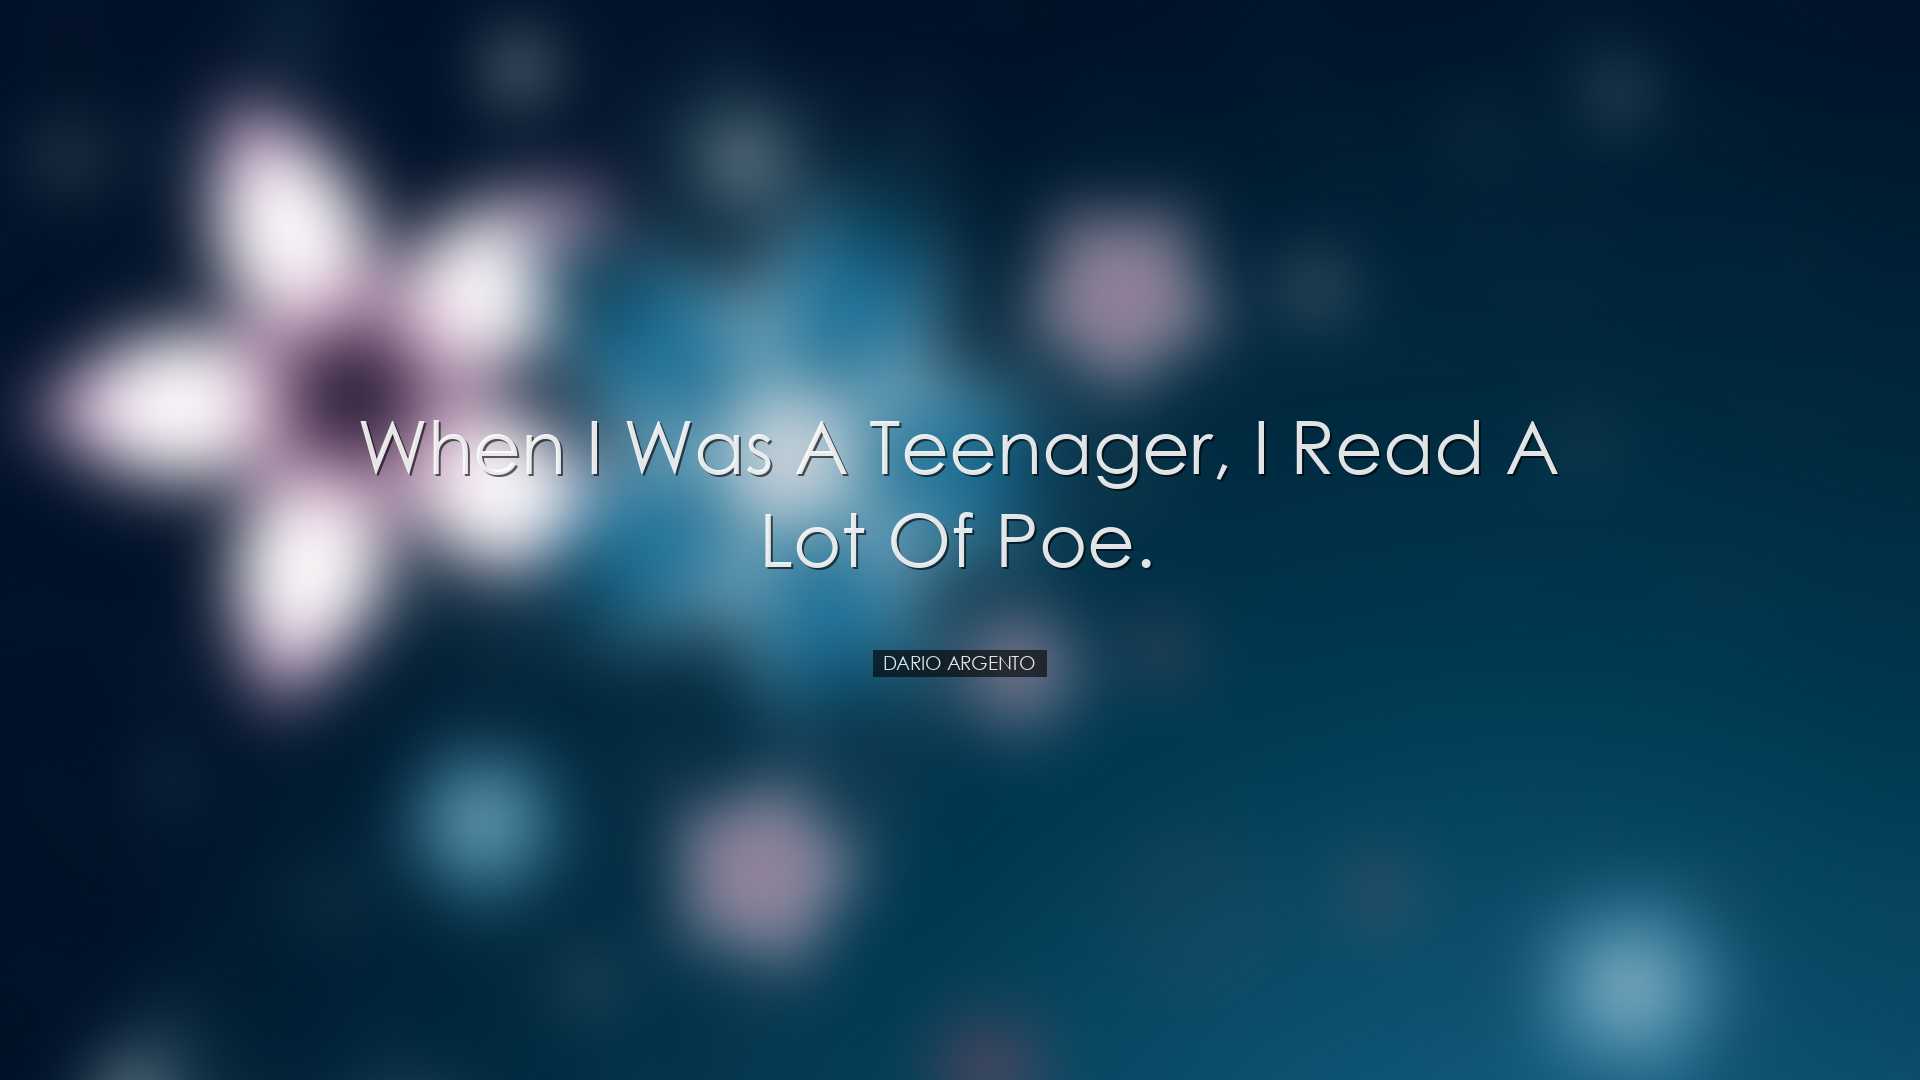 When I was a teenager, I read a lot of Poe. - Dario Argento